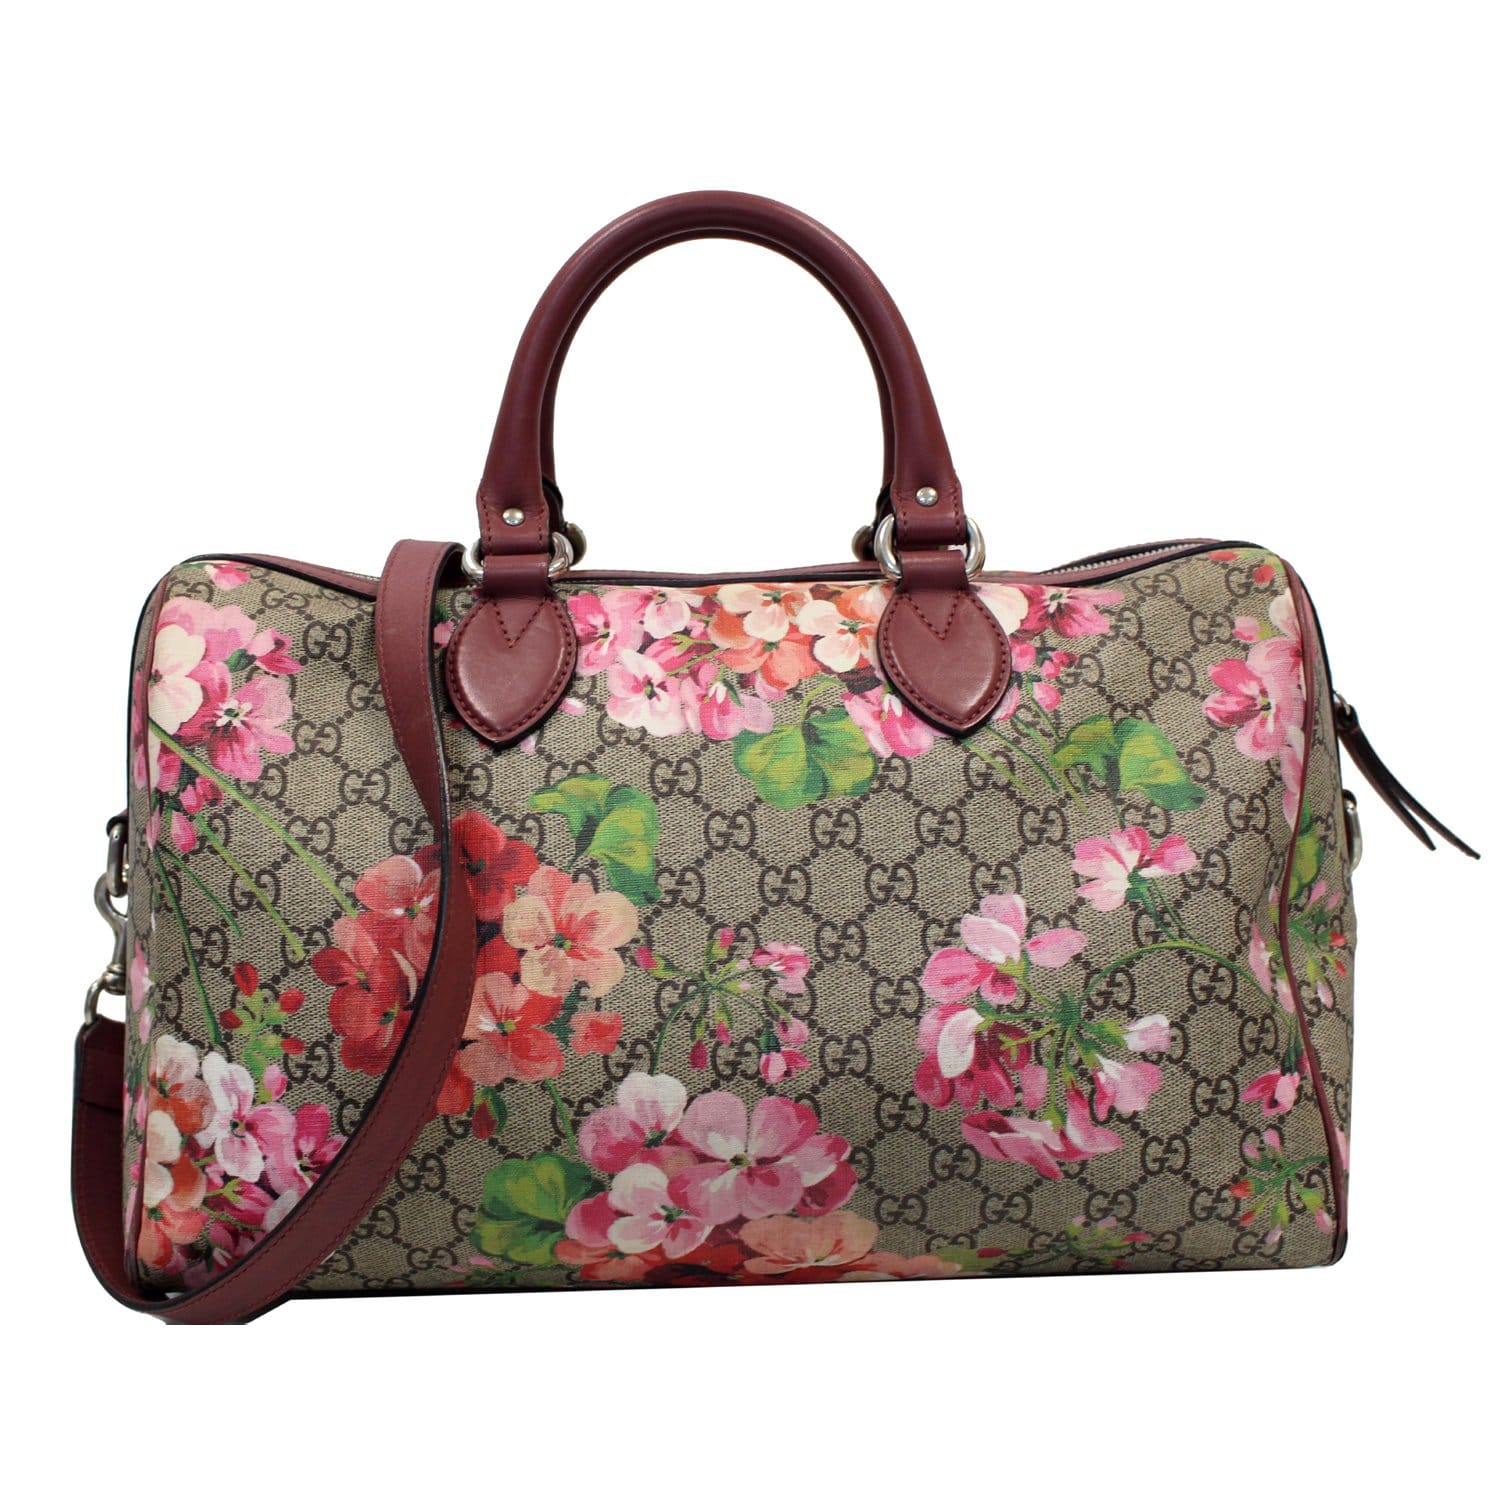 Gucci, Bags, Gucci Bag Authentic From Dillards